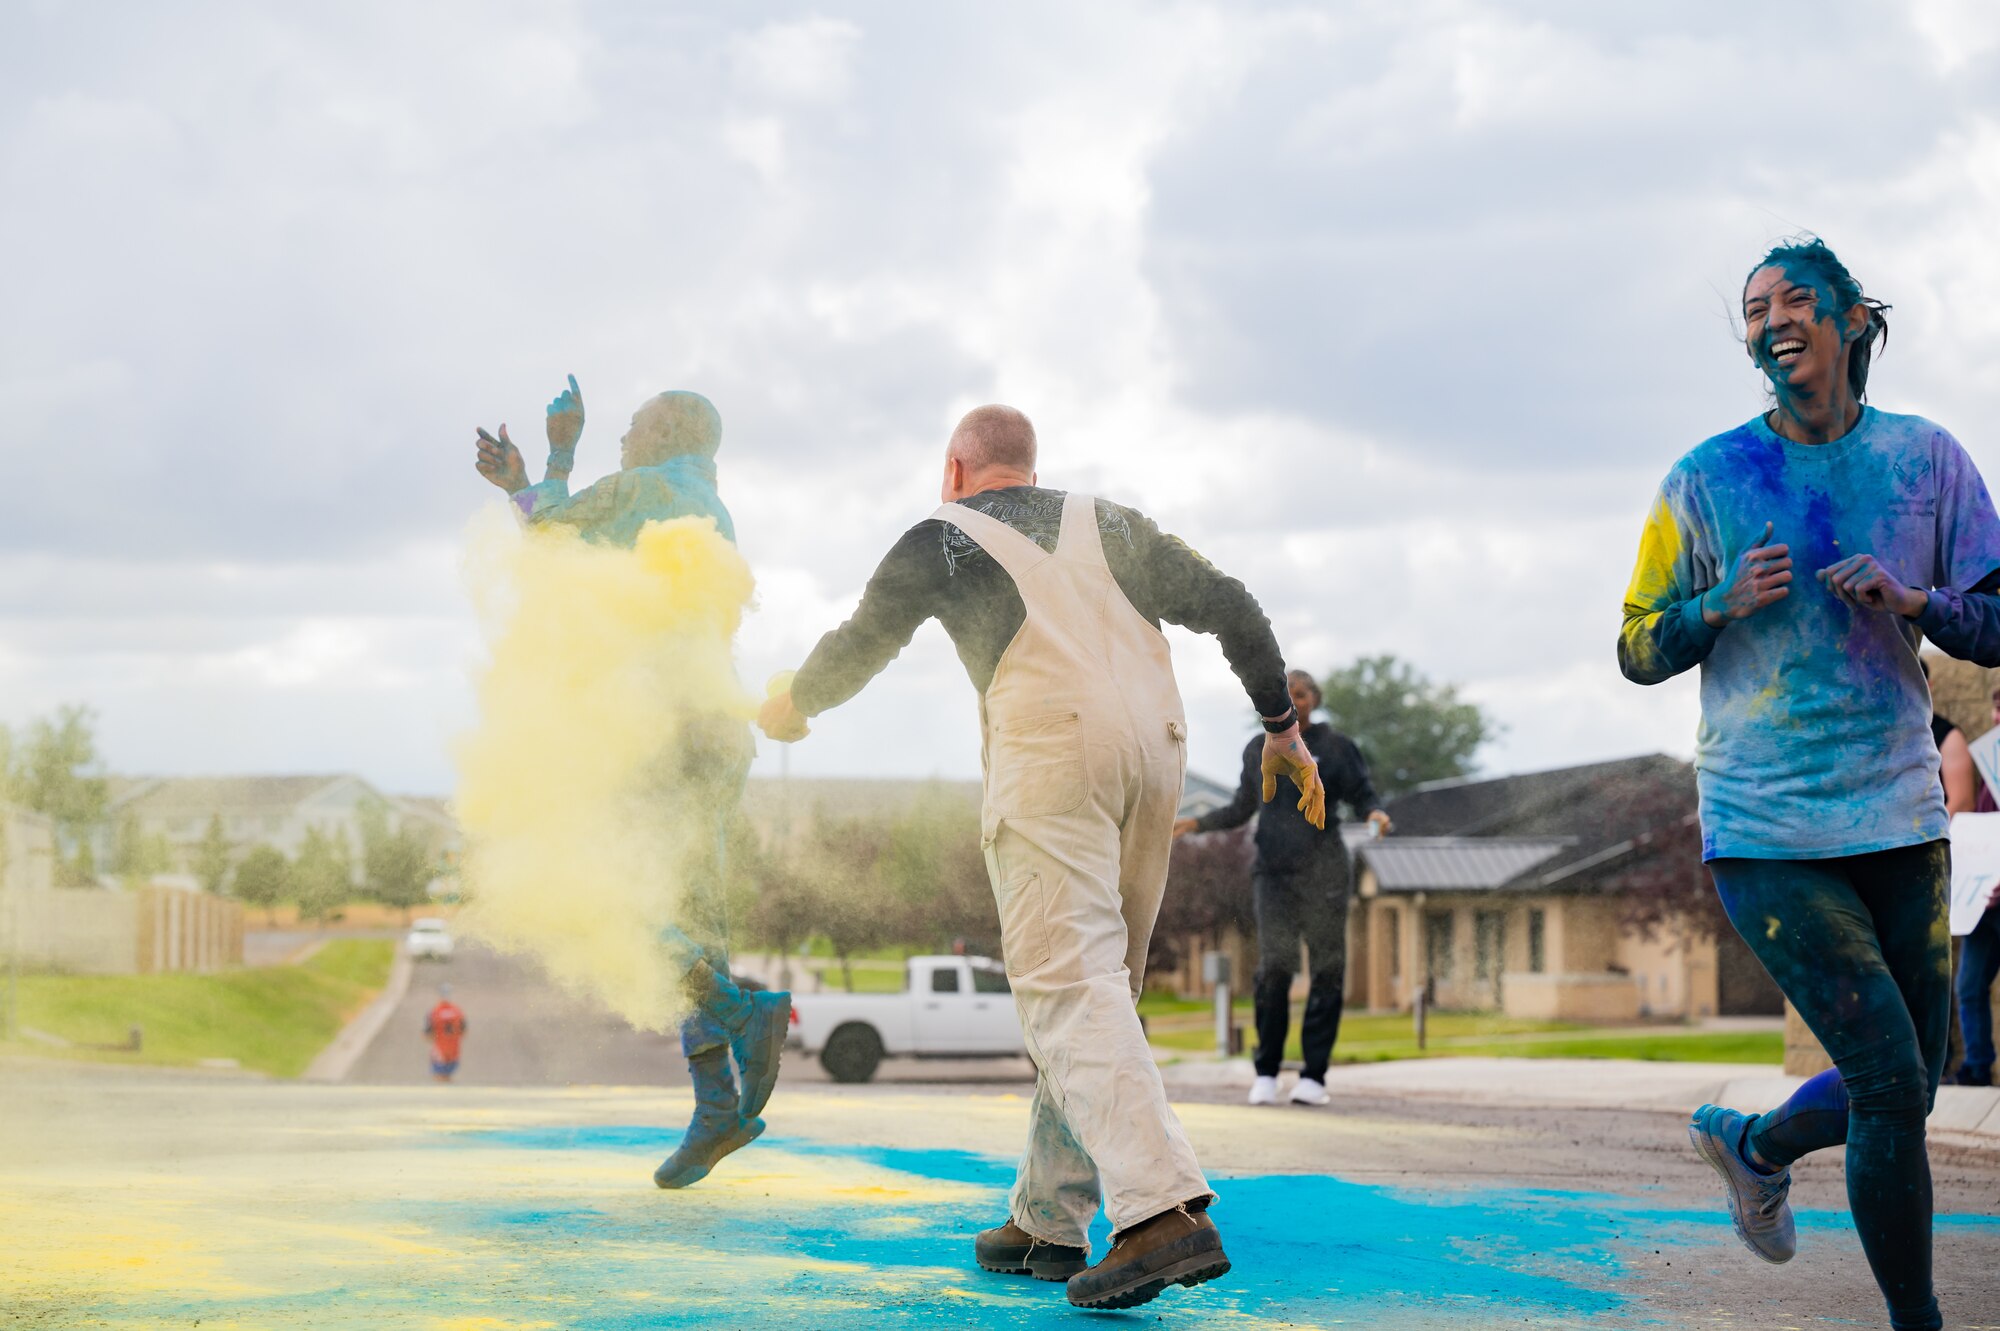 Kirk Clark, center, 341st Operational Medical Readiness Squadron health promotion coordinator, throws colored powder on Capt. Dominic Smyth, 341st Missile Wing chaplain, while Capt. Raquel Lewis, 341st OMRS public health flight commander, crosses the finish line during a Suicide Awareness Color Run Sept. 9, 2022, at Malmstrom Air Force Base, Mont.